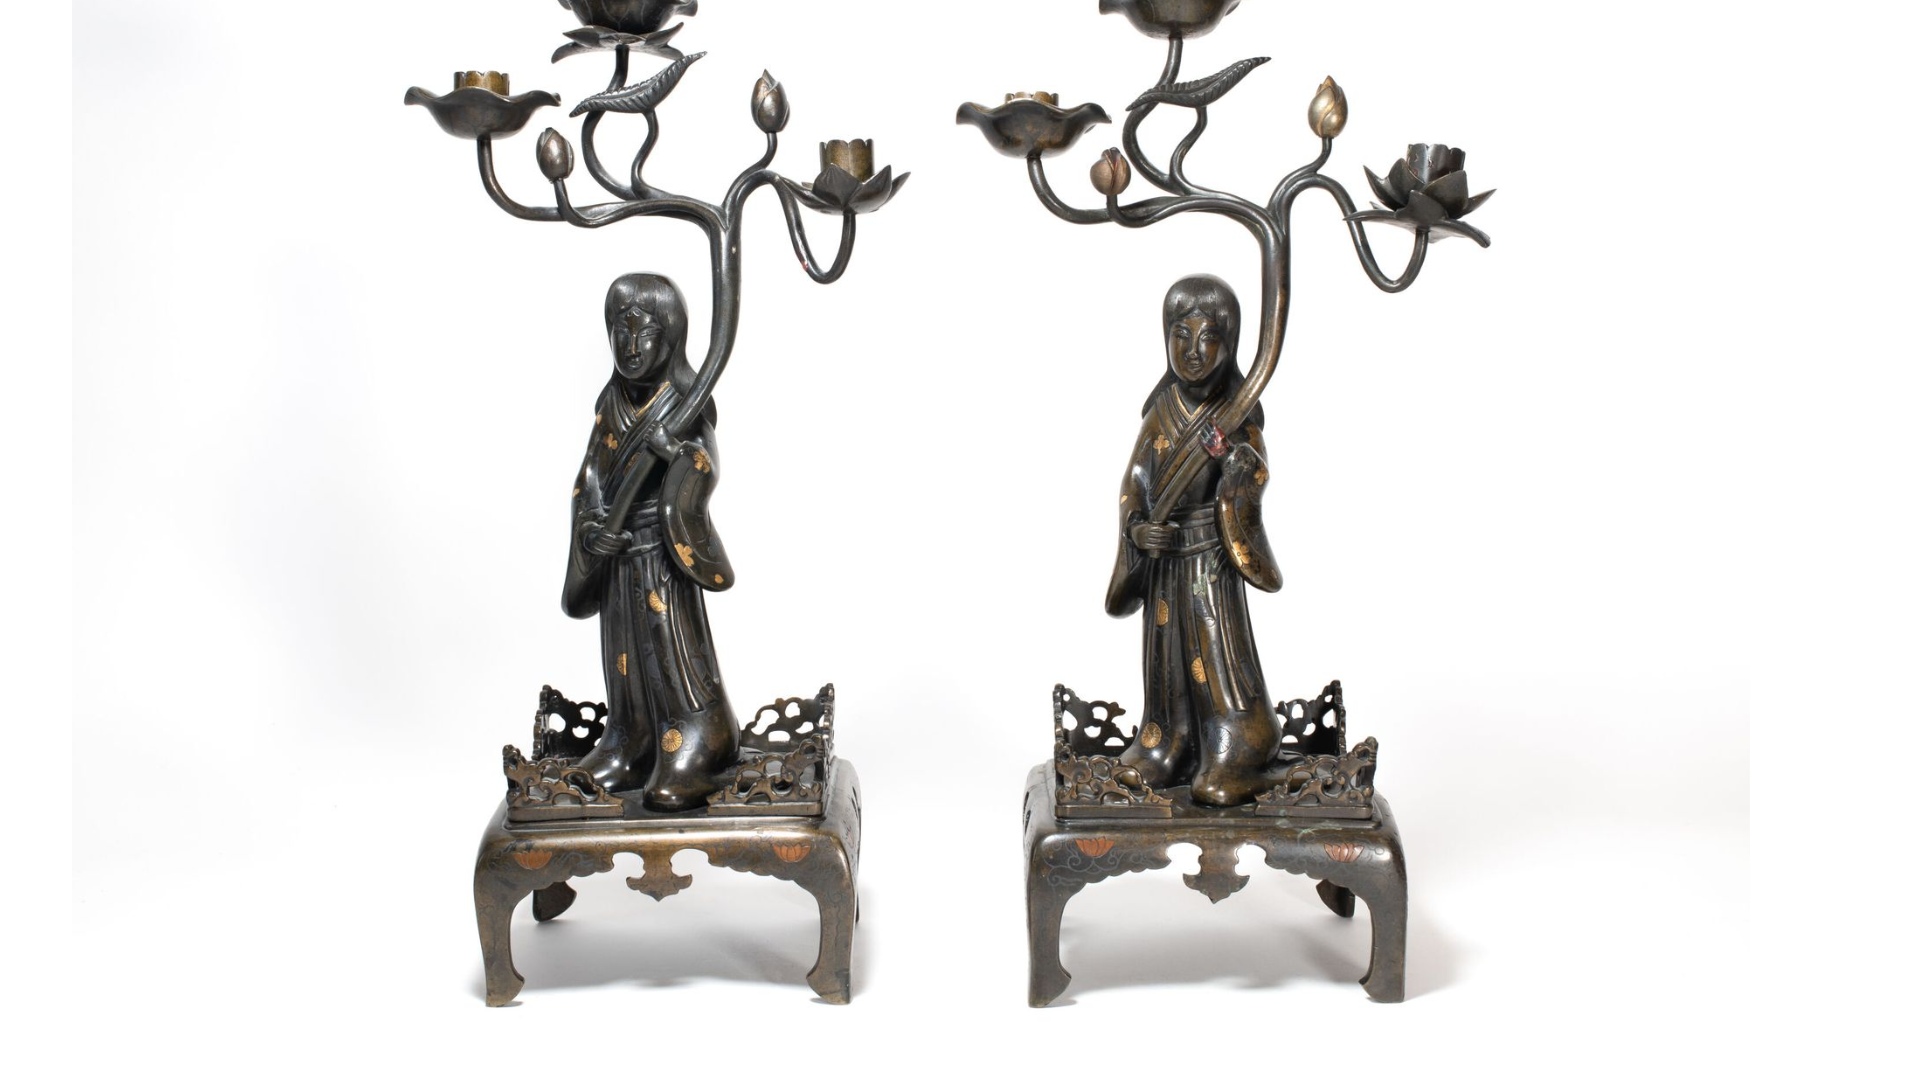 Pair of Large Candle Sticks Bronze with Gold inlay Statue Japan Meiji era (1868-1912) Japanese